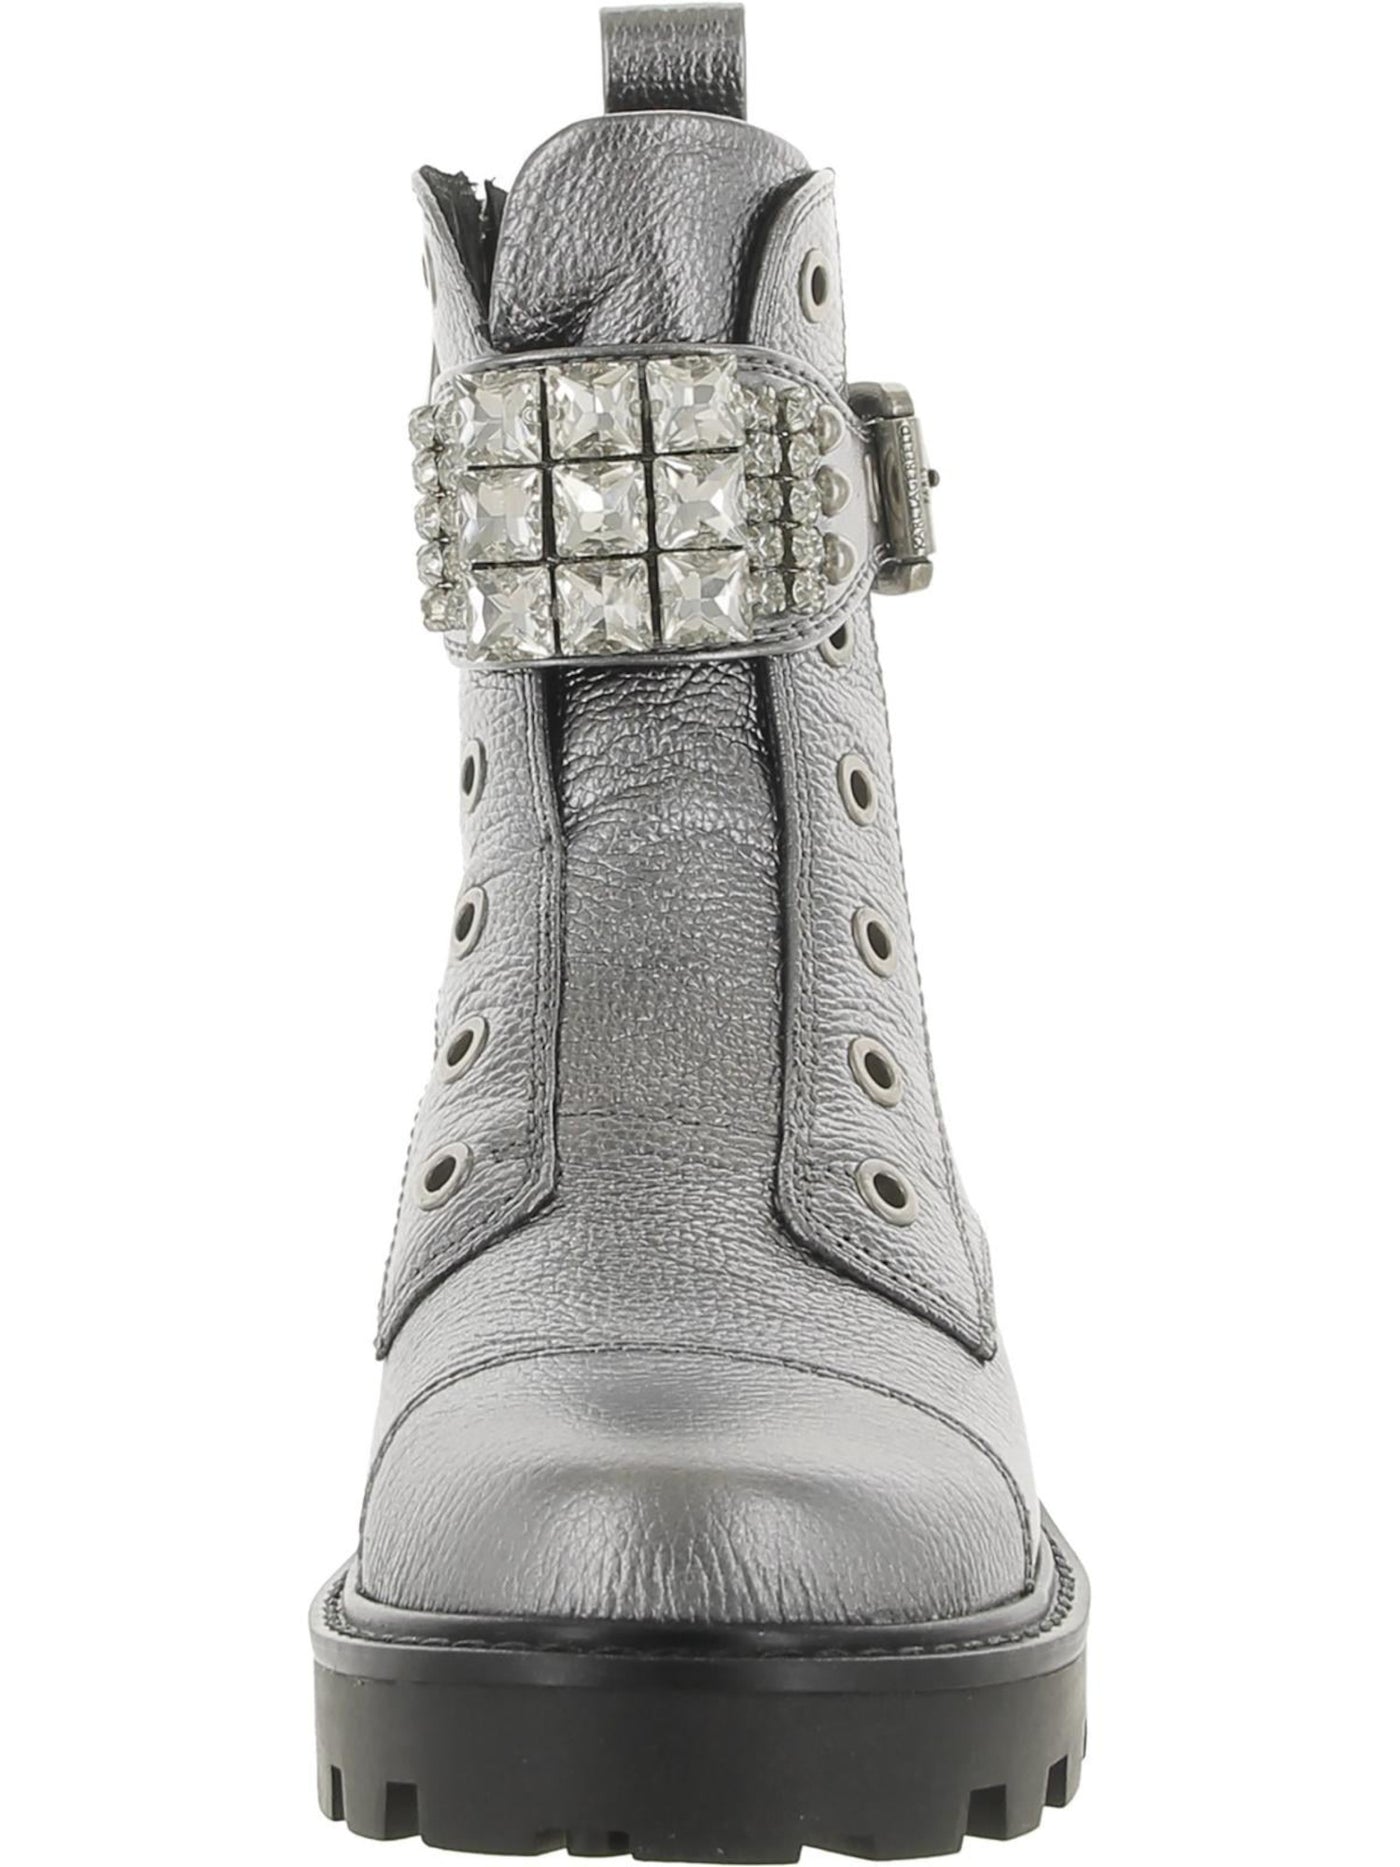 KARL LAGERFELD Womens Silver Metallic Lug Sole Padded Grommet Detail Pull Tab Buckle Accent Embellished Maeva Round Toe Block Heel Zip-Up Leather Combat Boots 11